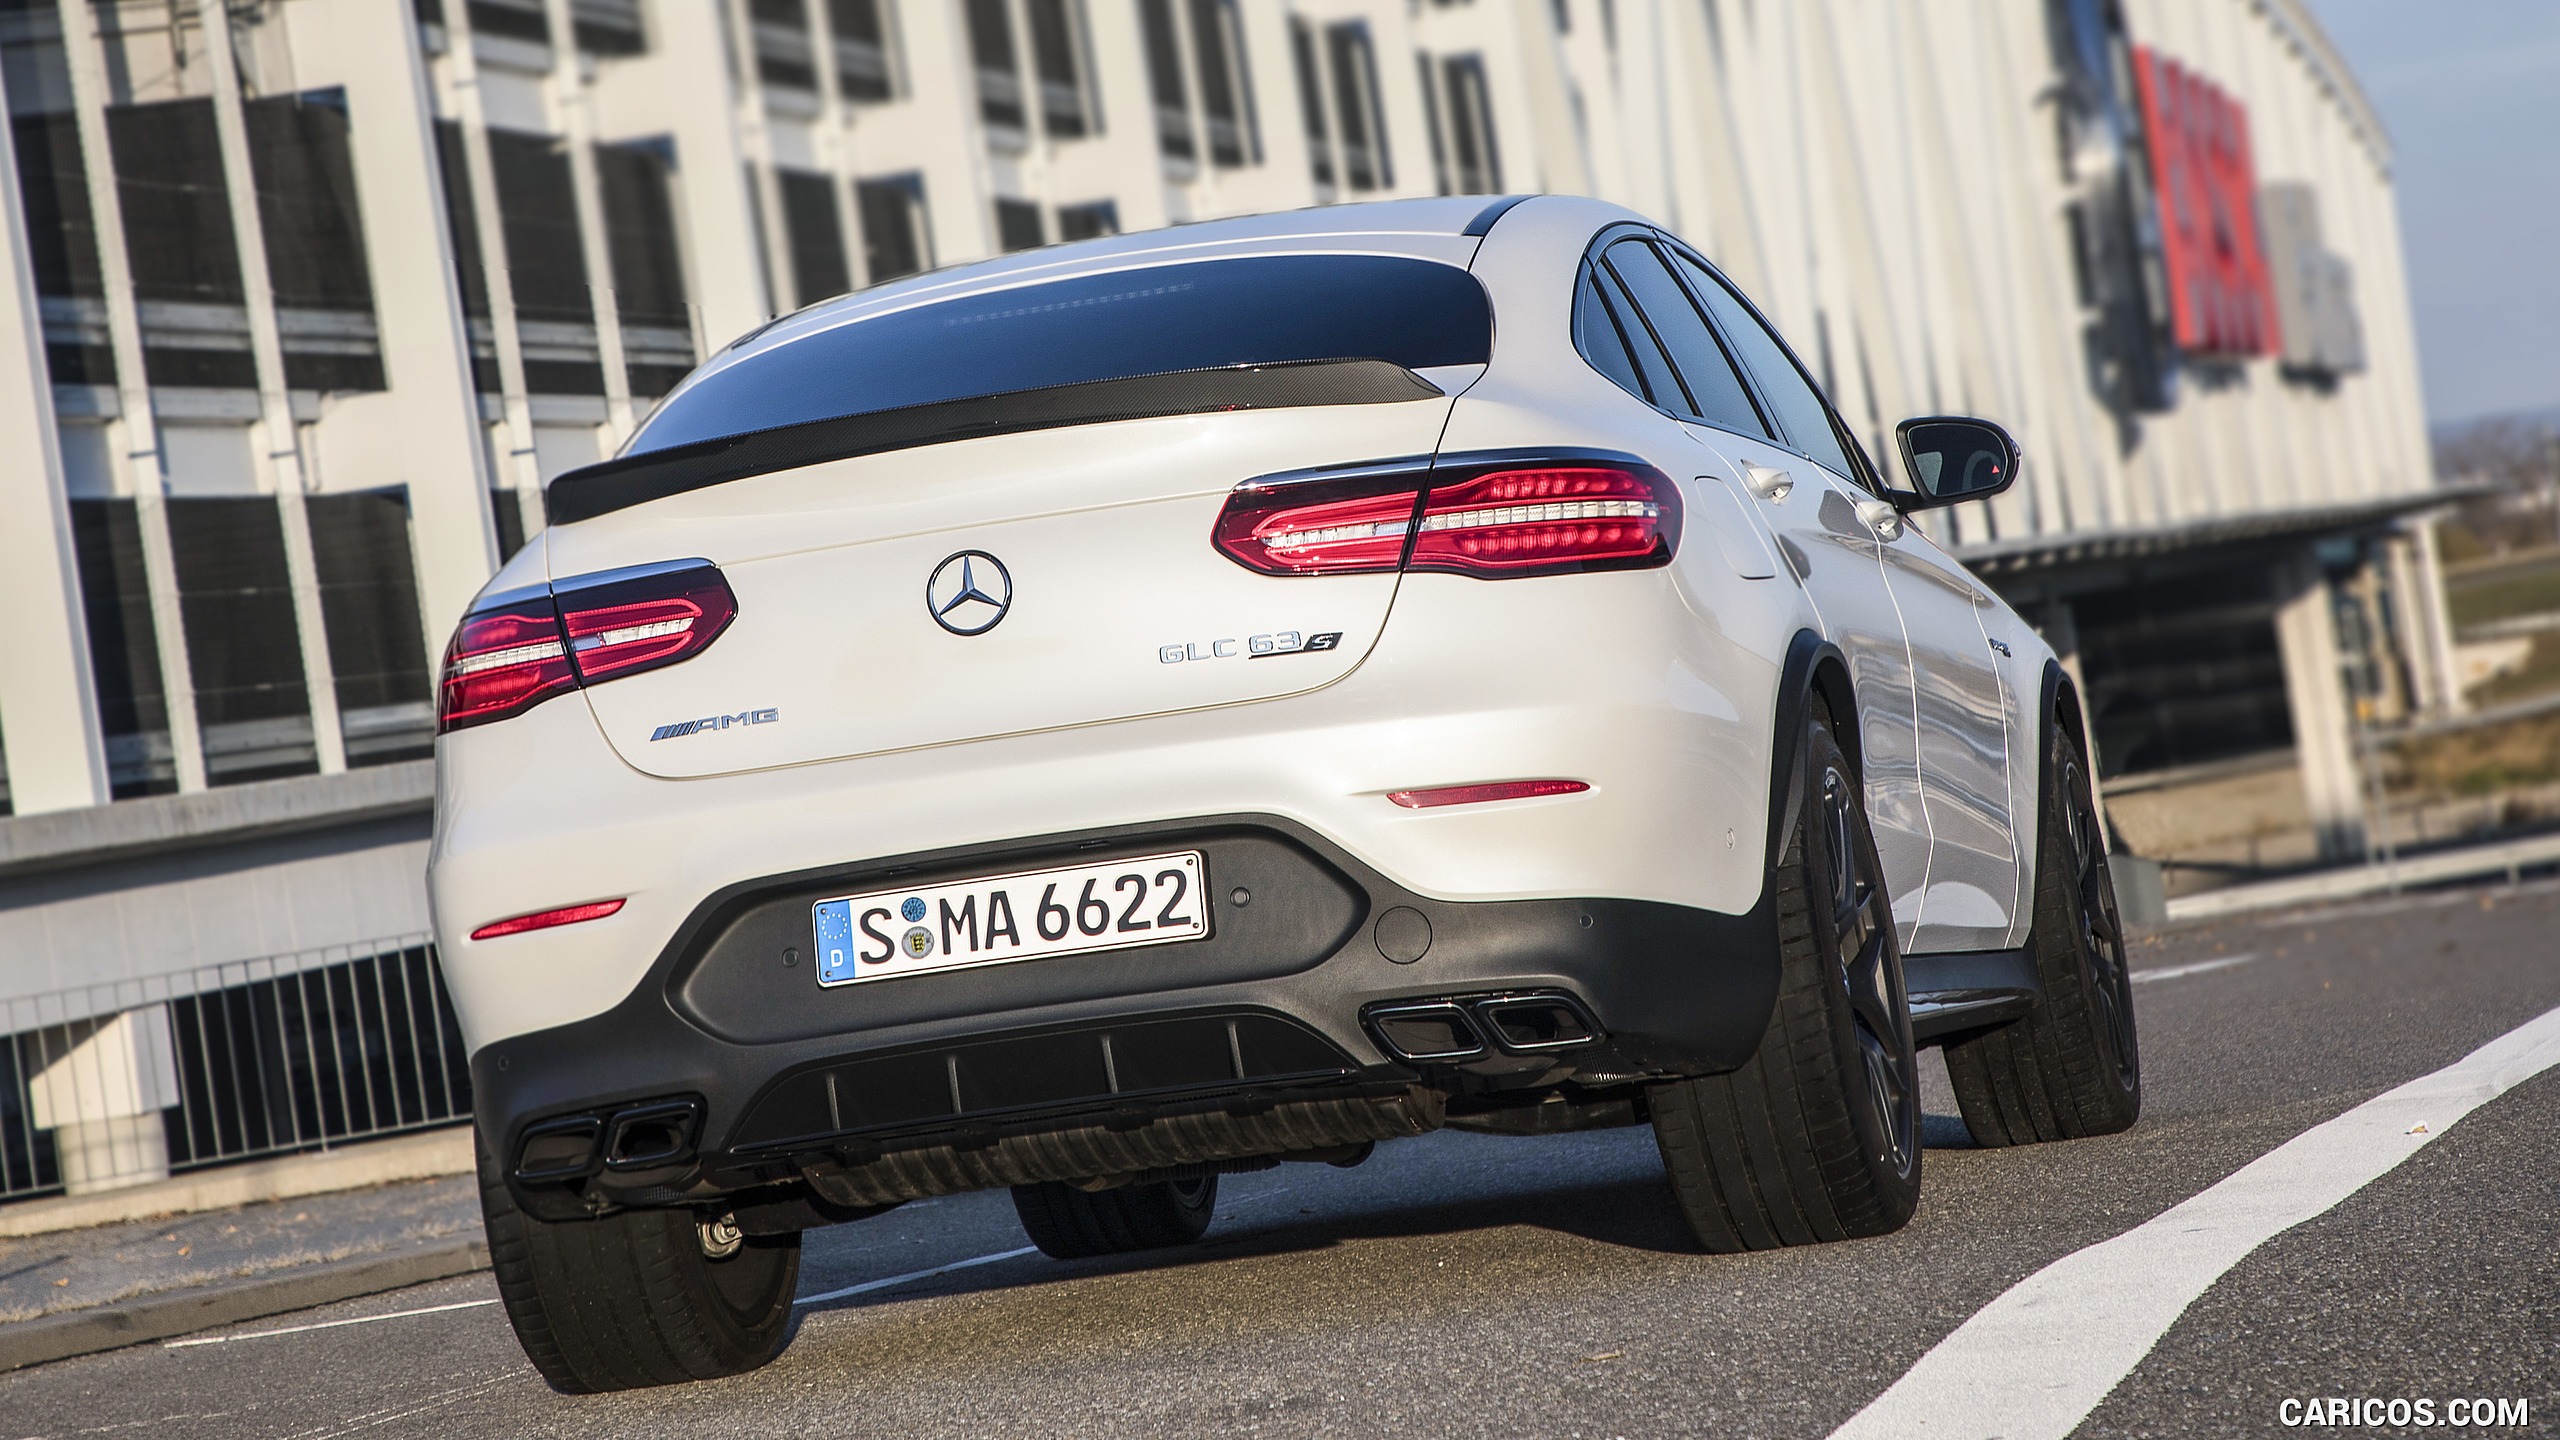 2018 Mercedes-AMG GLC 63 S Coupe - Rear, #49 of 75